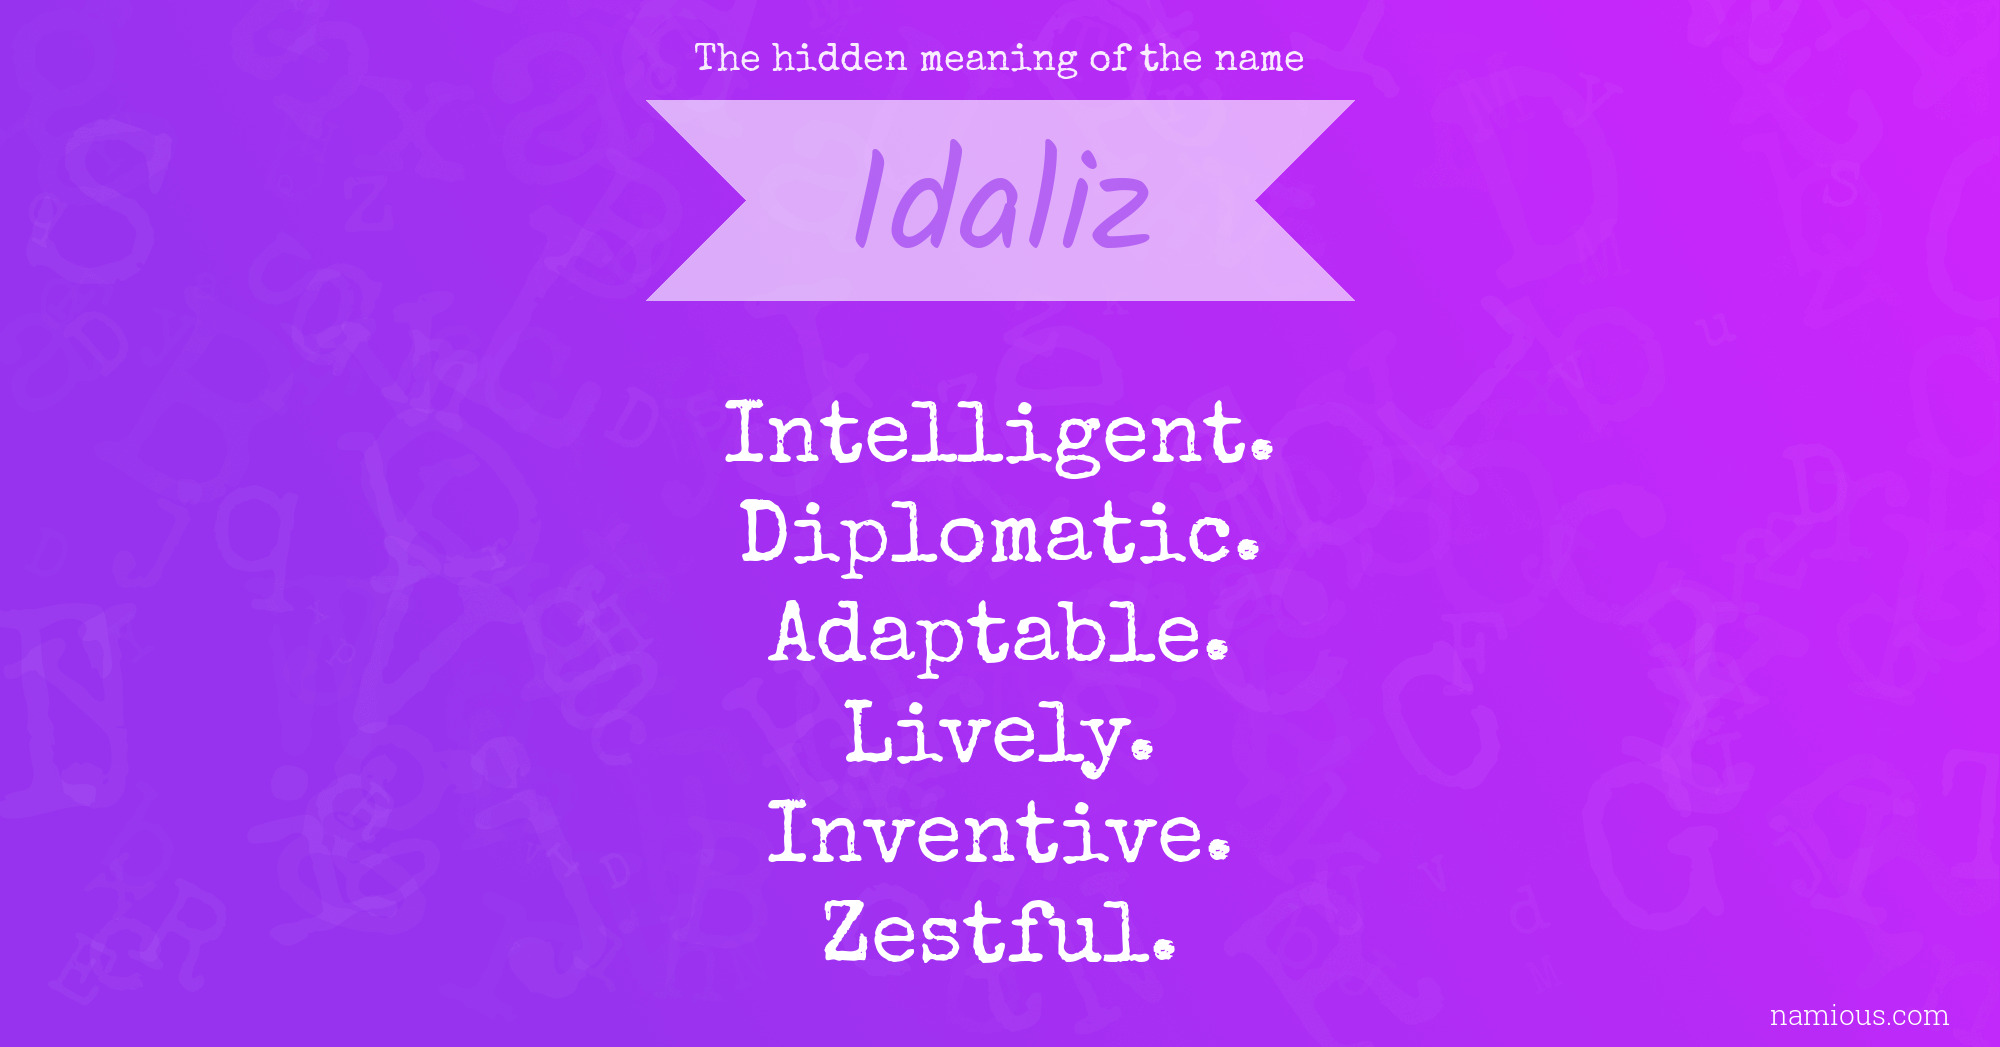 The hidden meaning of the name Idaliz